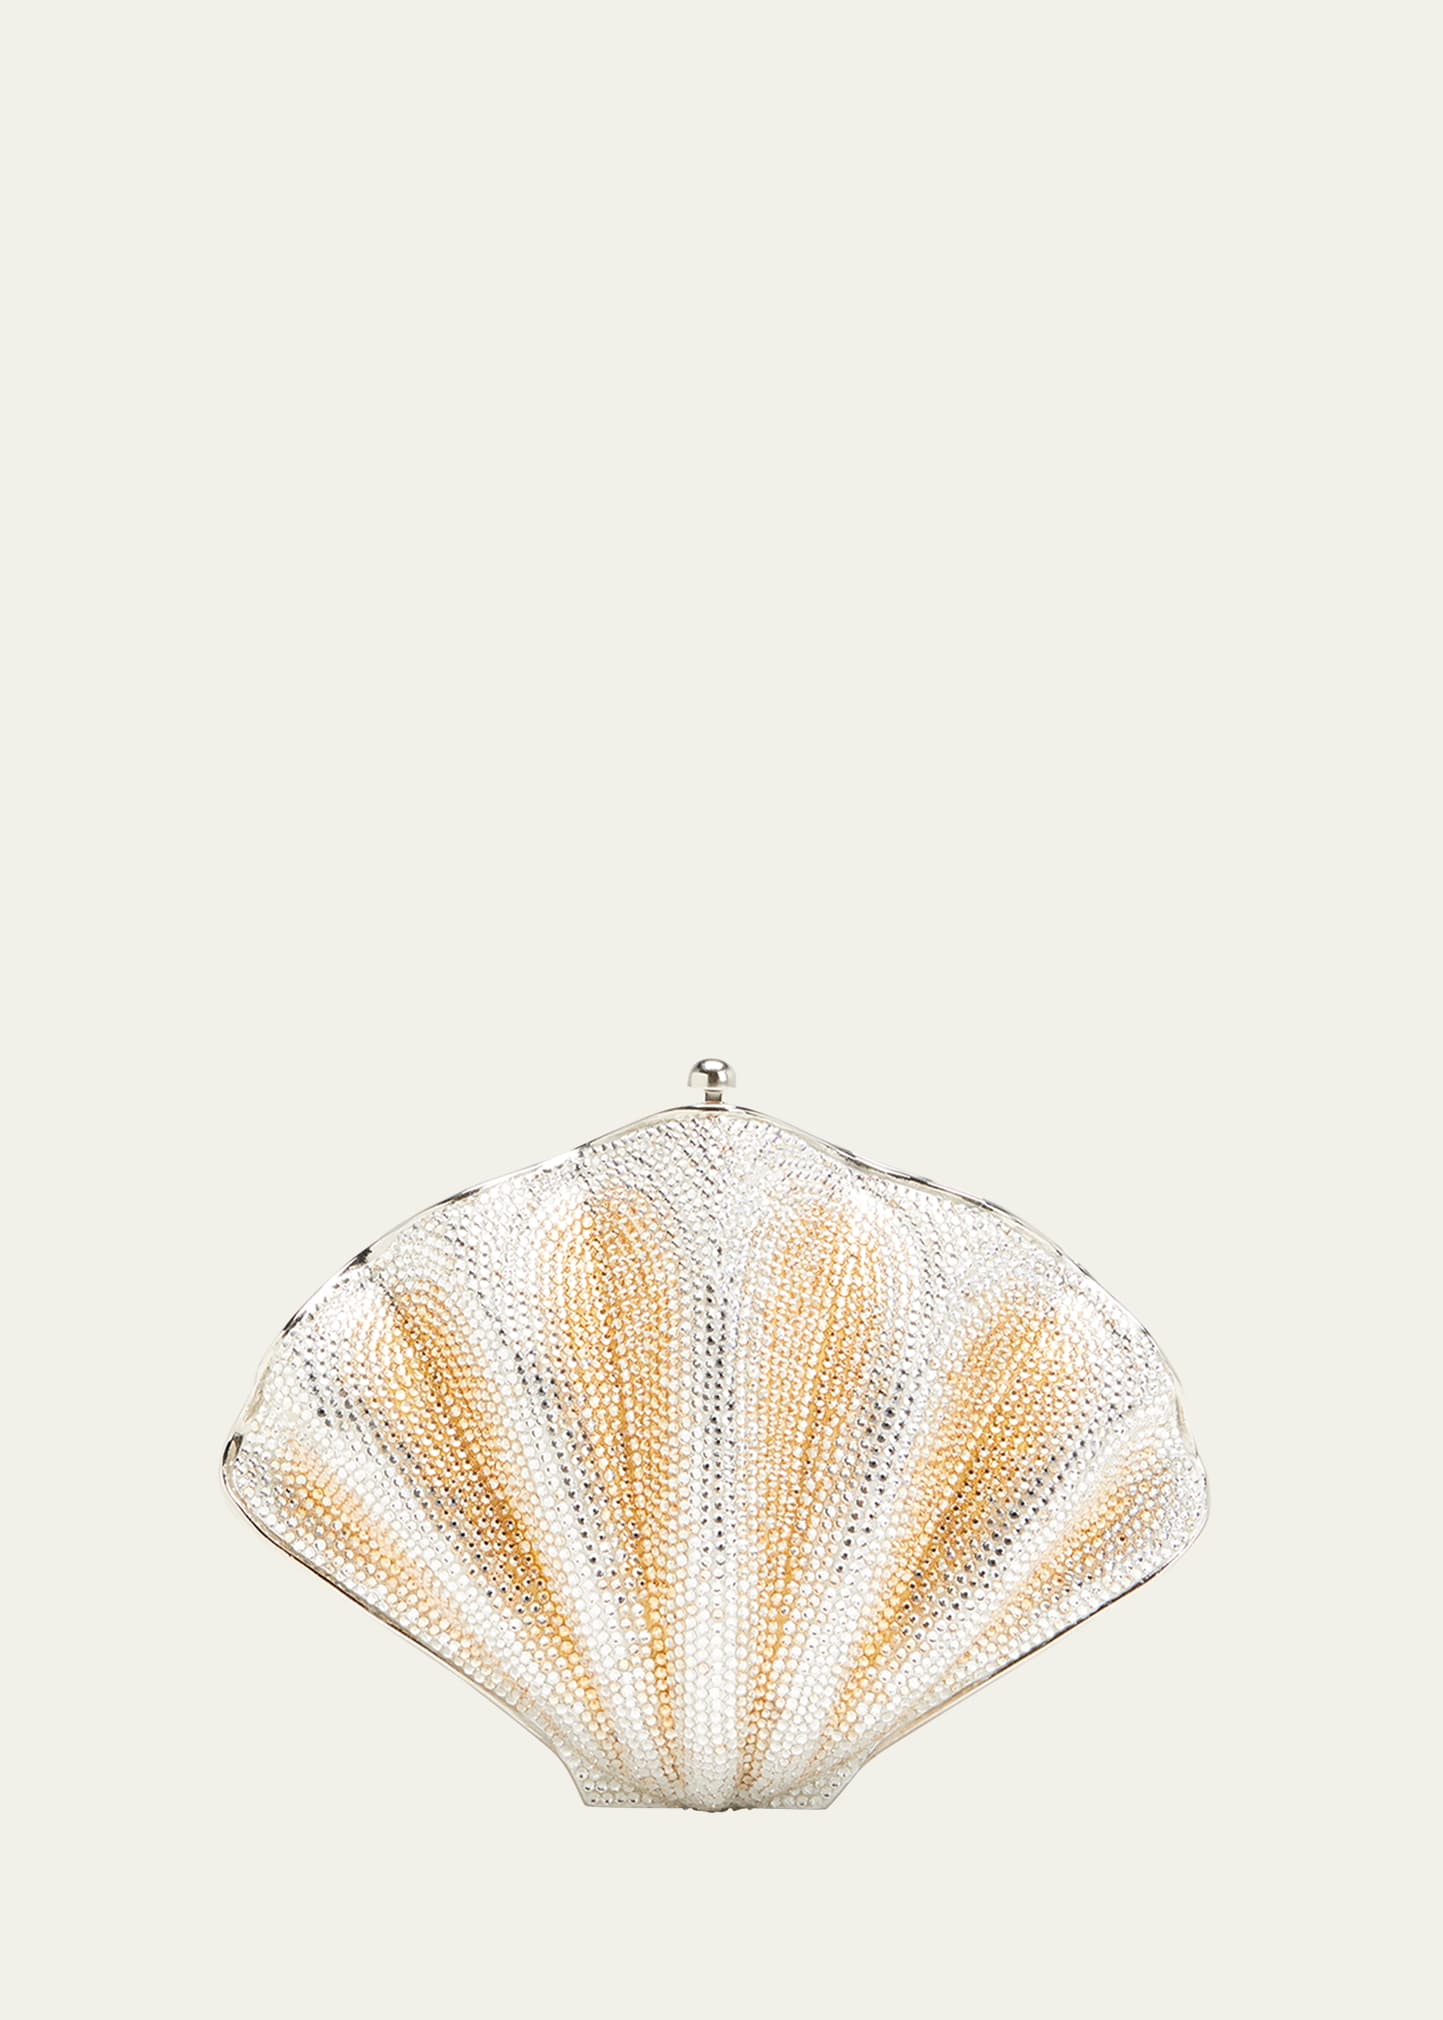 Judith Leiber Couture Scallop Clam Crystal Minaudiere